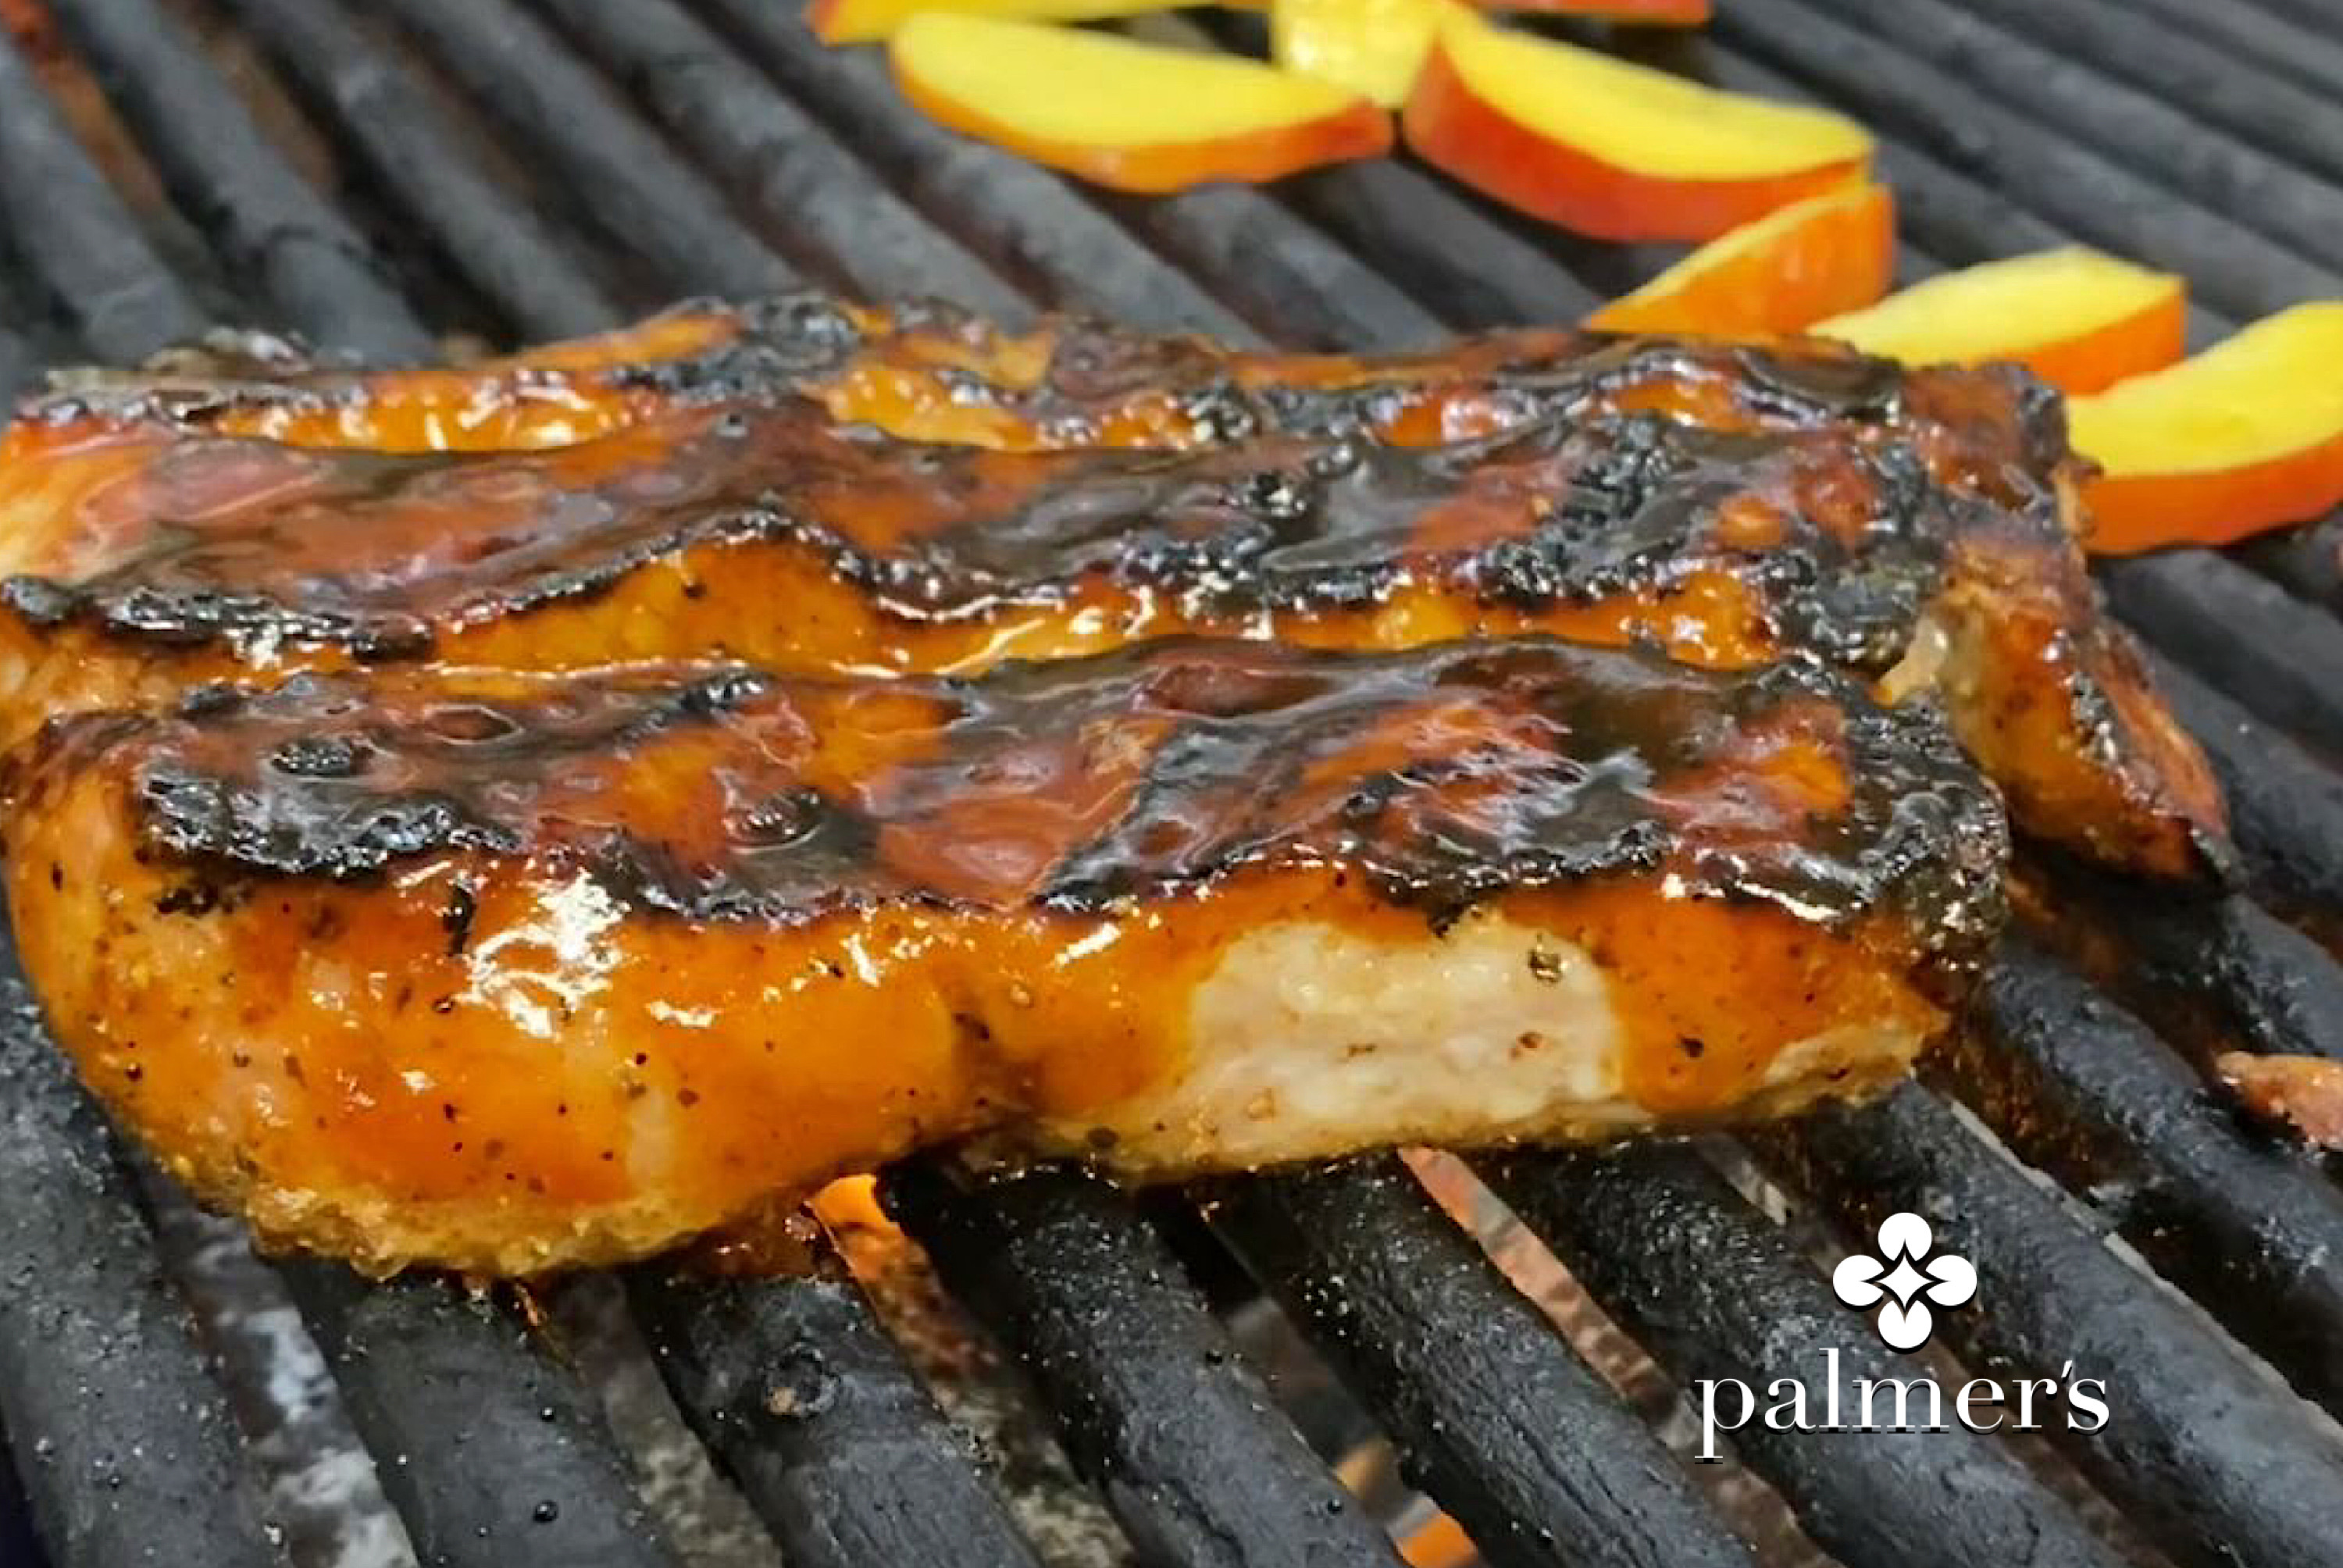 Country Style Pork Ribs with Bourbon Marinade, Peach BBQ sauce and Grilled Peaches